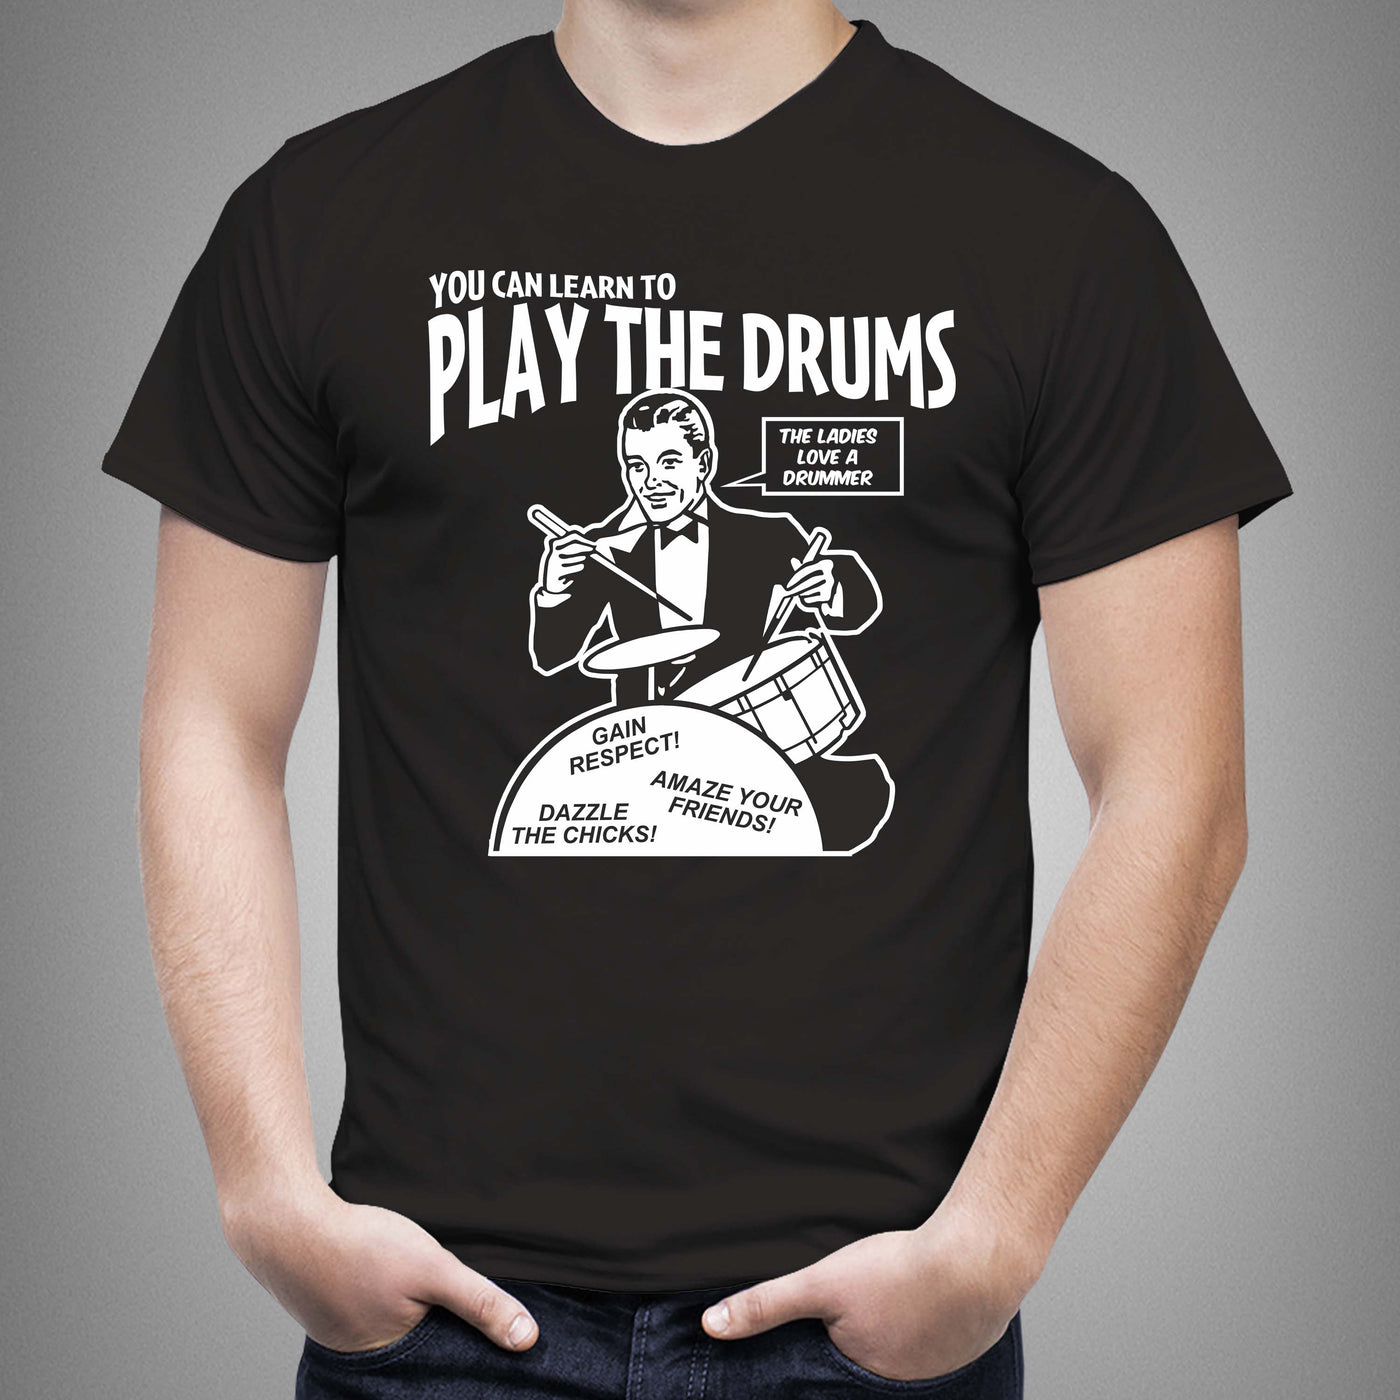 Learn To Play The Drums